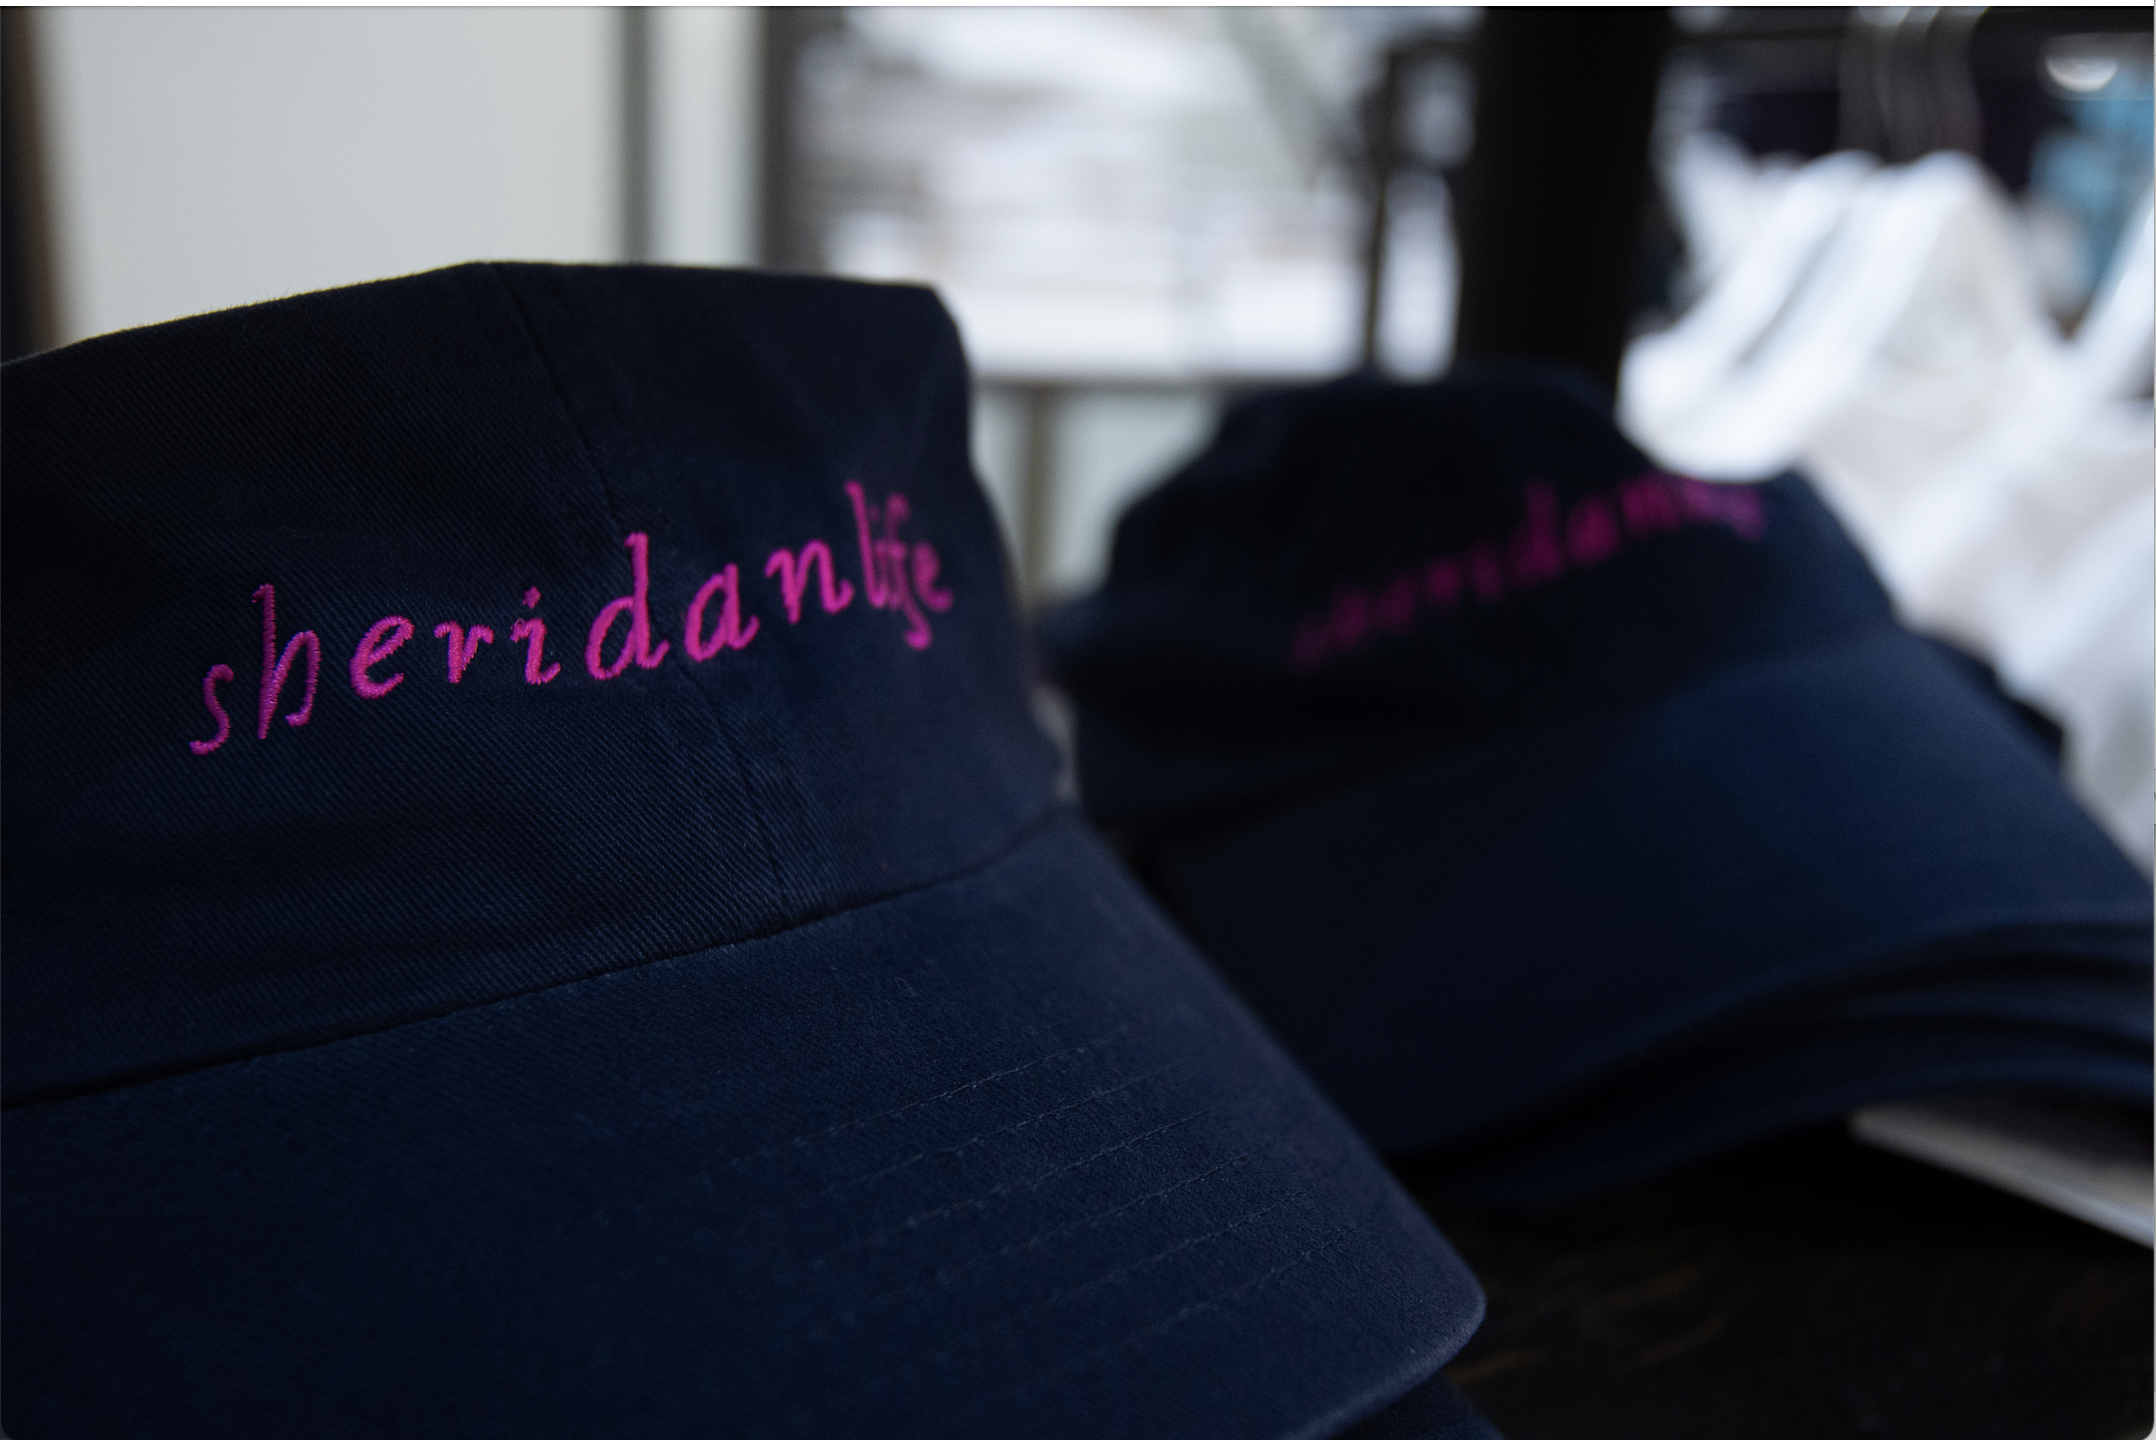  A collection of navy hats with magenta  Sheridan Life over the brim of the hat.  